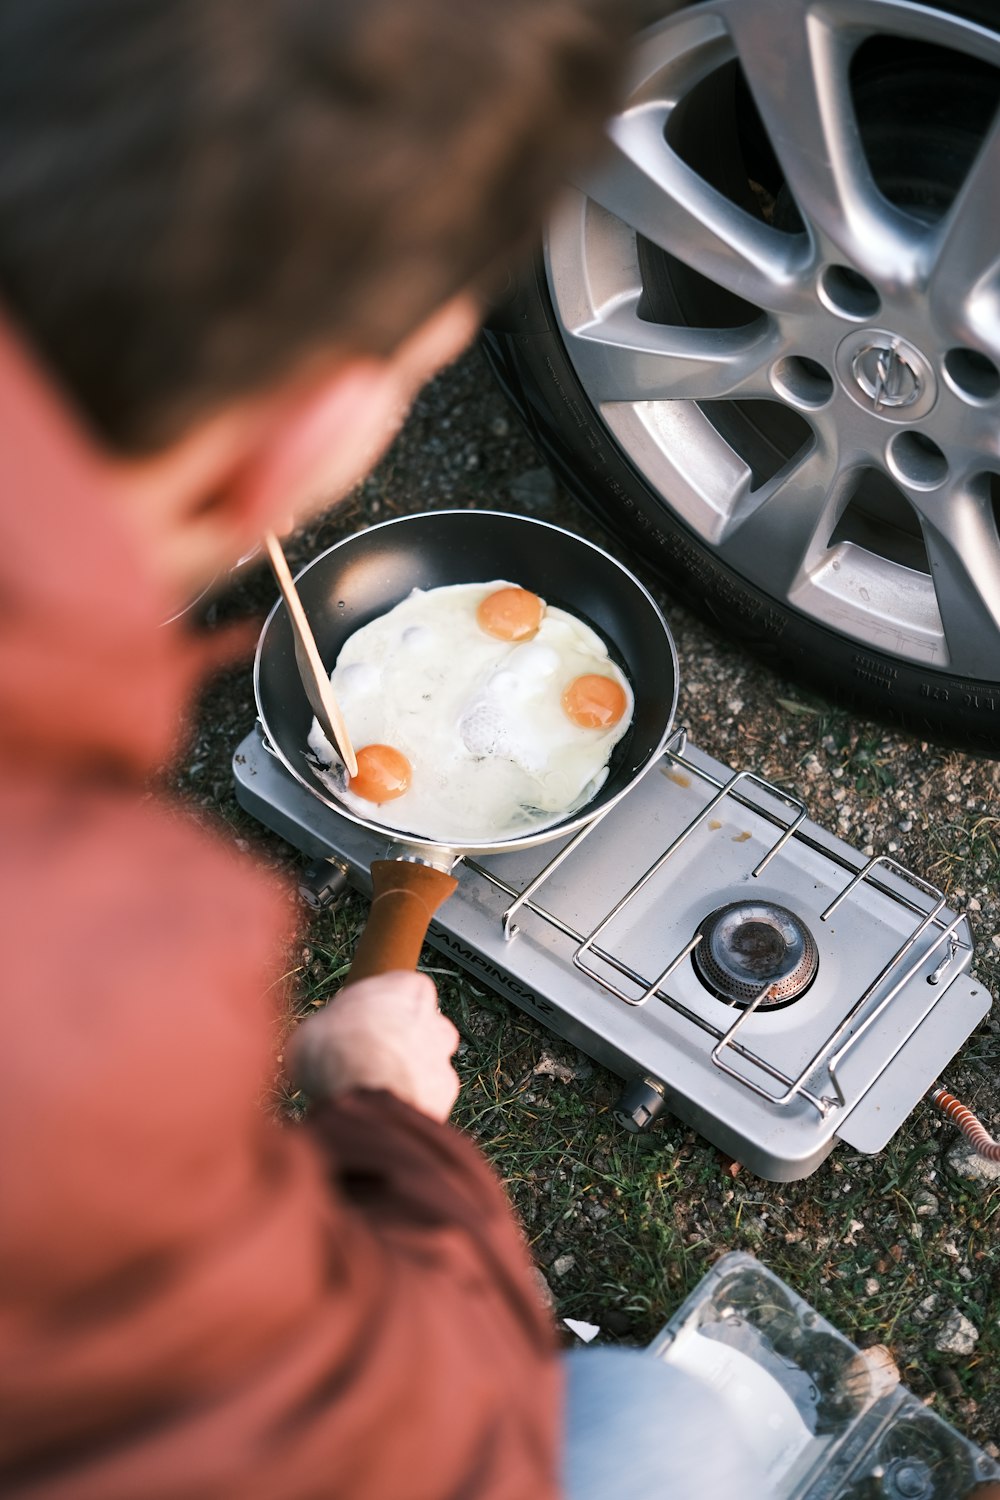 a man is cooking eggs on a stove